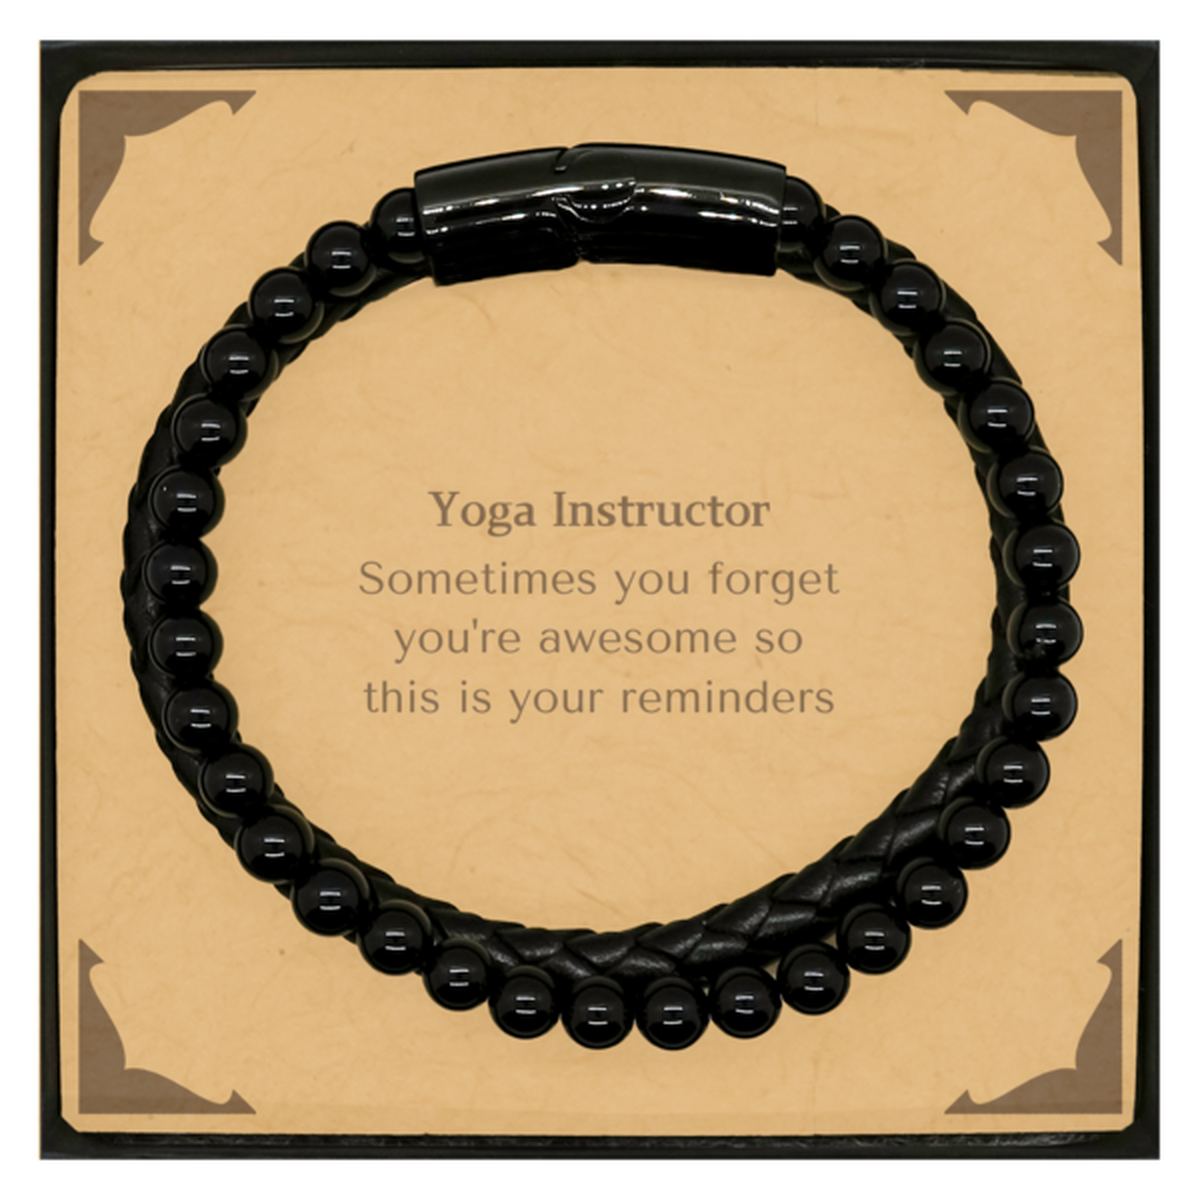 Sentimental Yoga Instructor Stone Leather Bracelets, Yoga Instructor Sometimes you forget you're awesome so this is your reminders, Graduation Christmas Birthday Gifts for Yoga Instructor, Men, Women, Coworkers